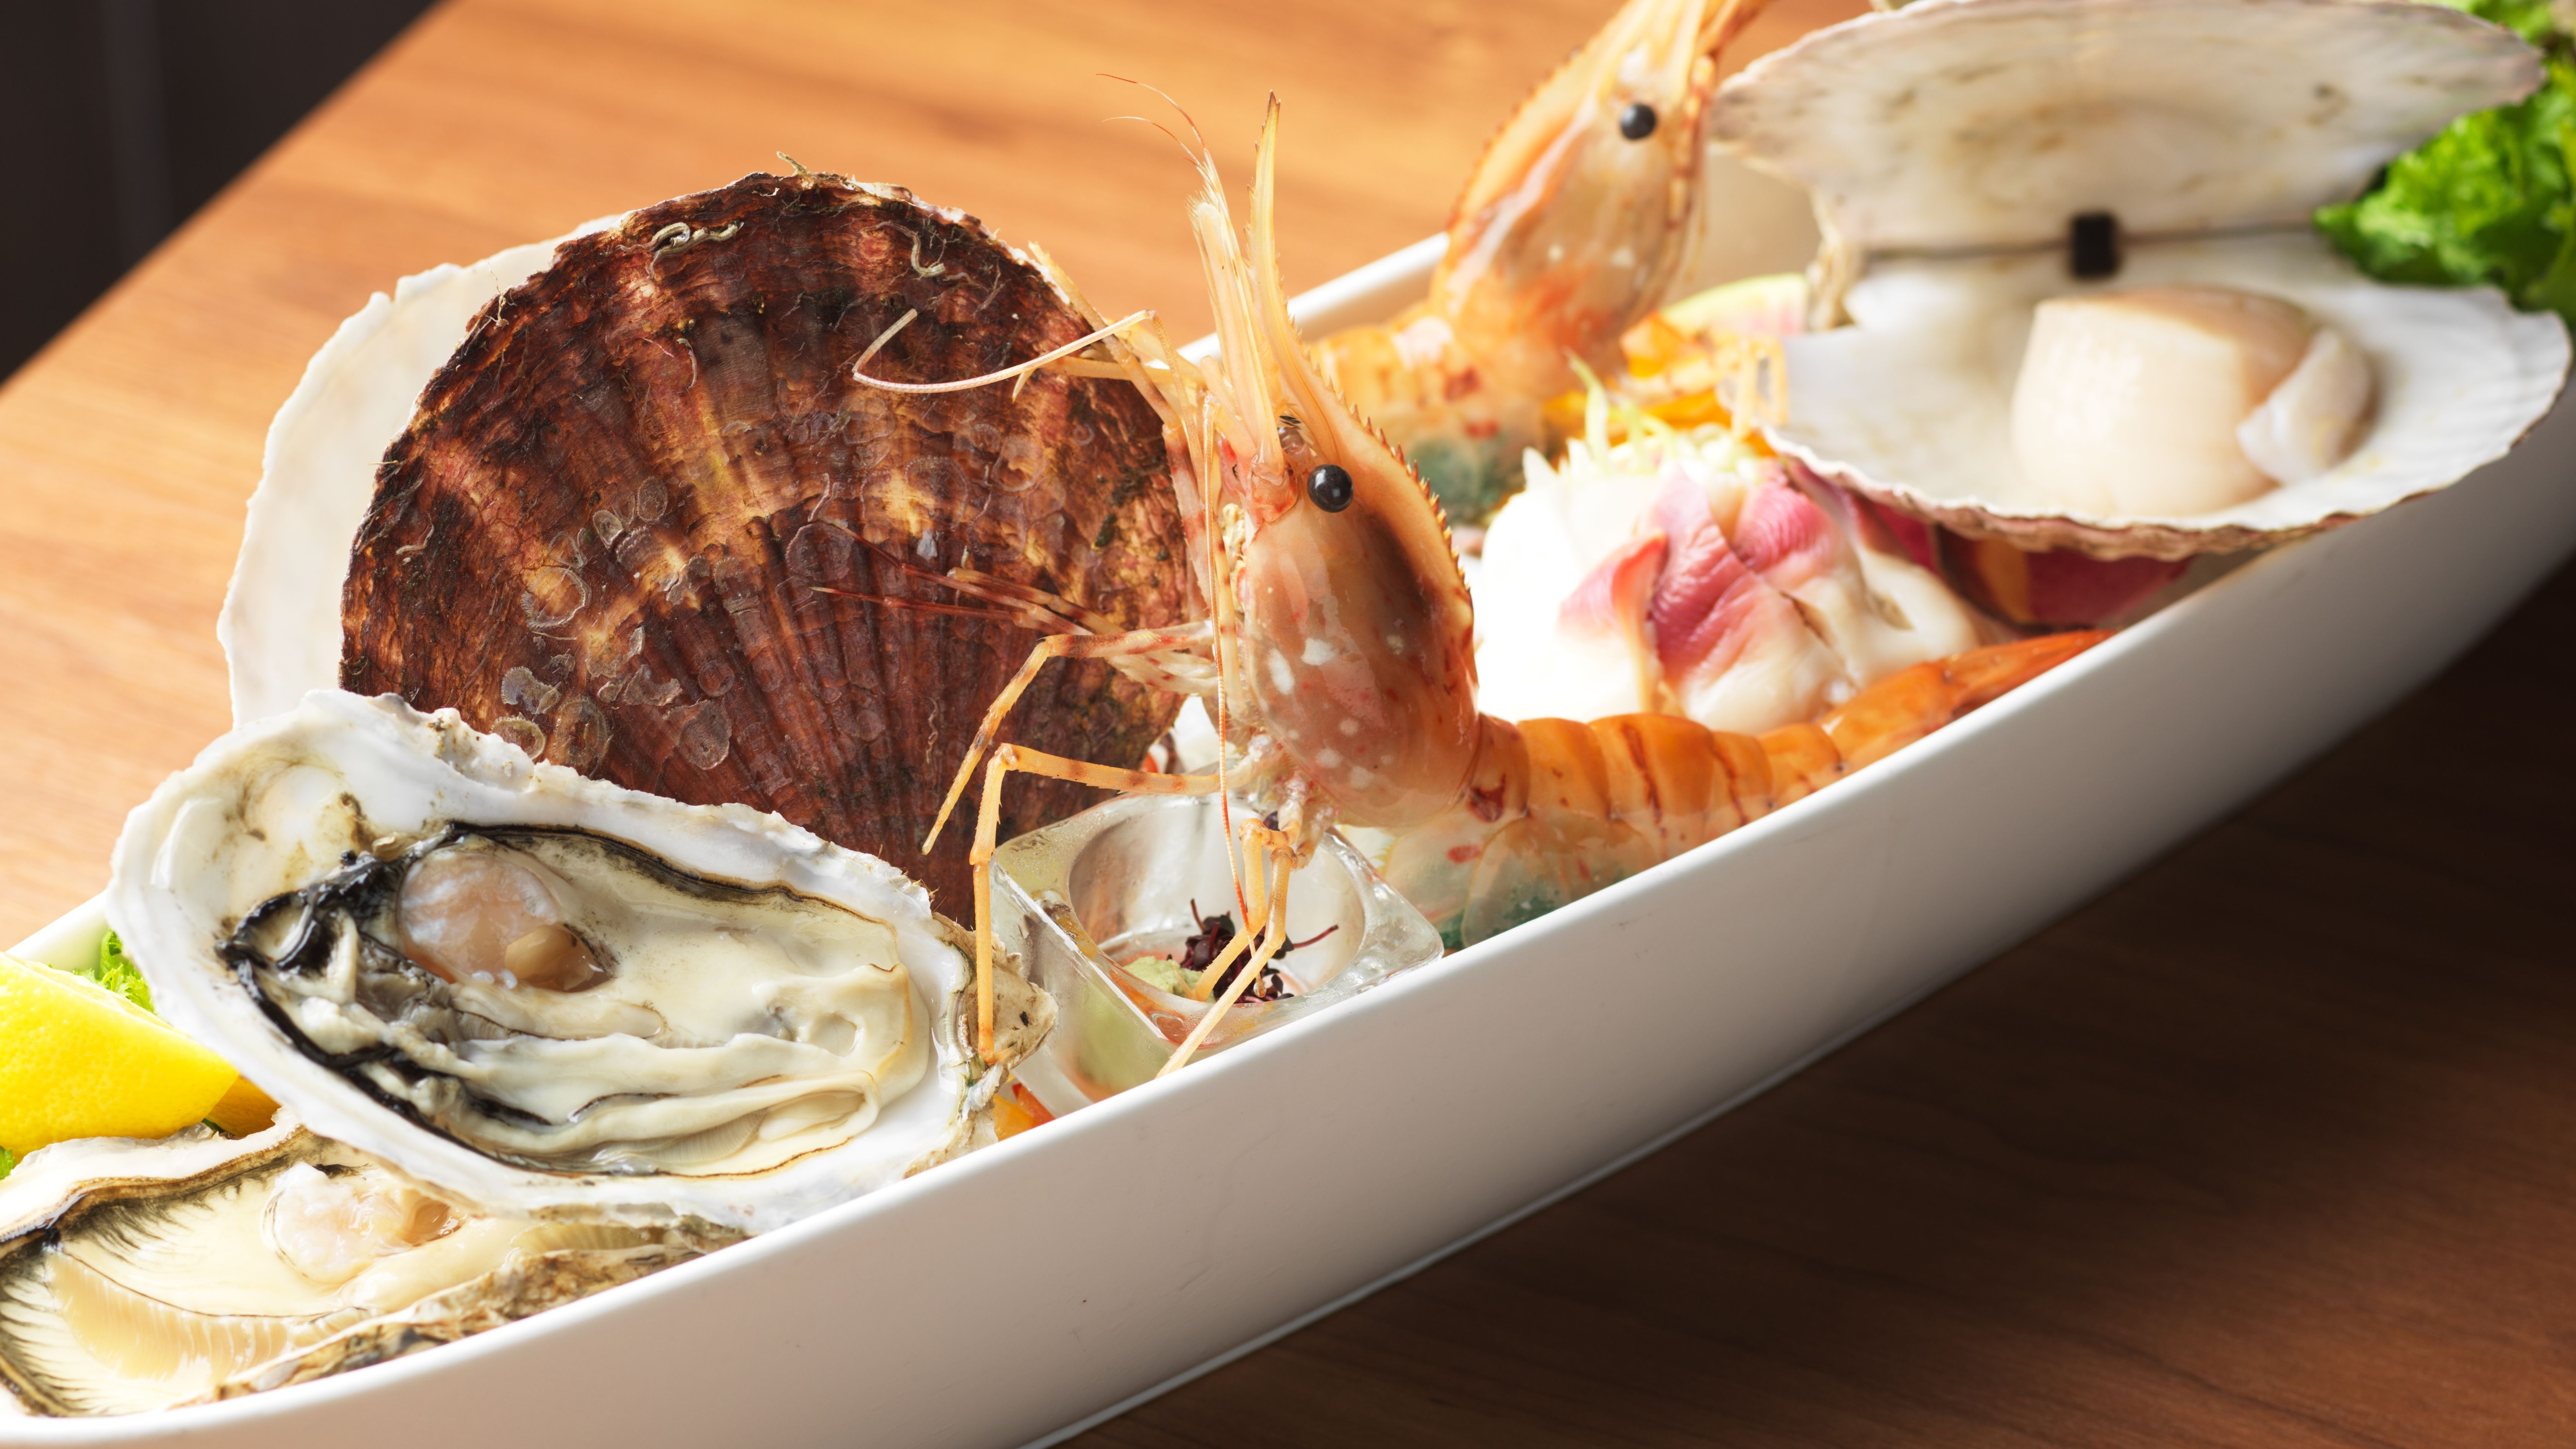 [Buffet] Chef's special luxurious main dish "Seasonal seafood platter" (example of serving for 2 people)